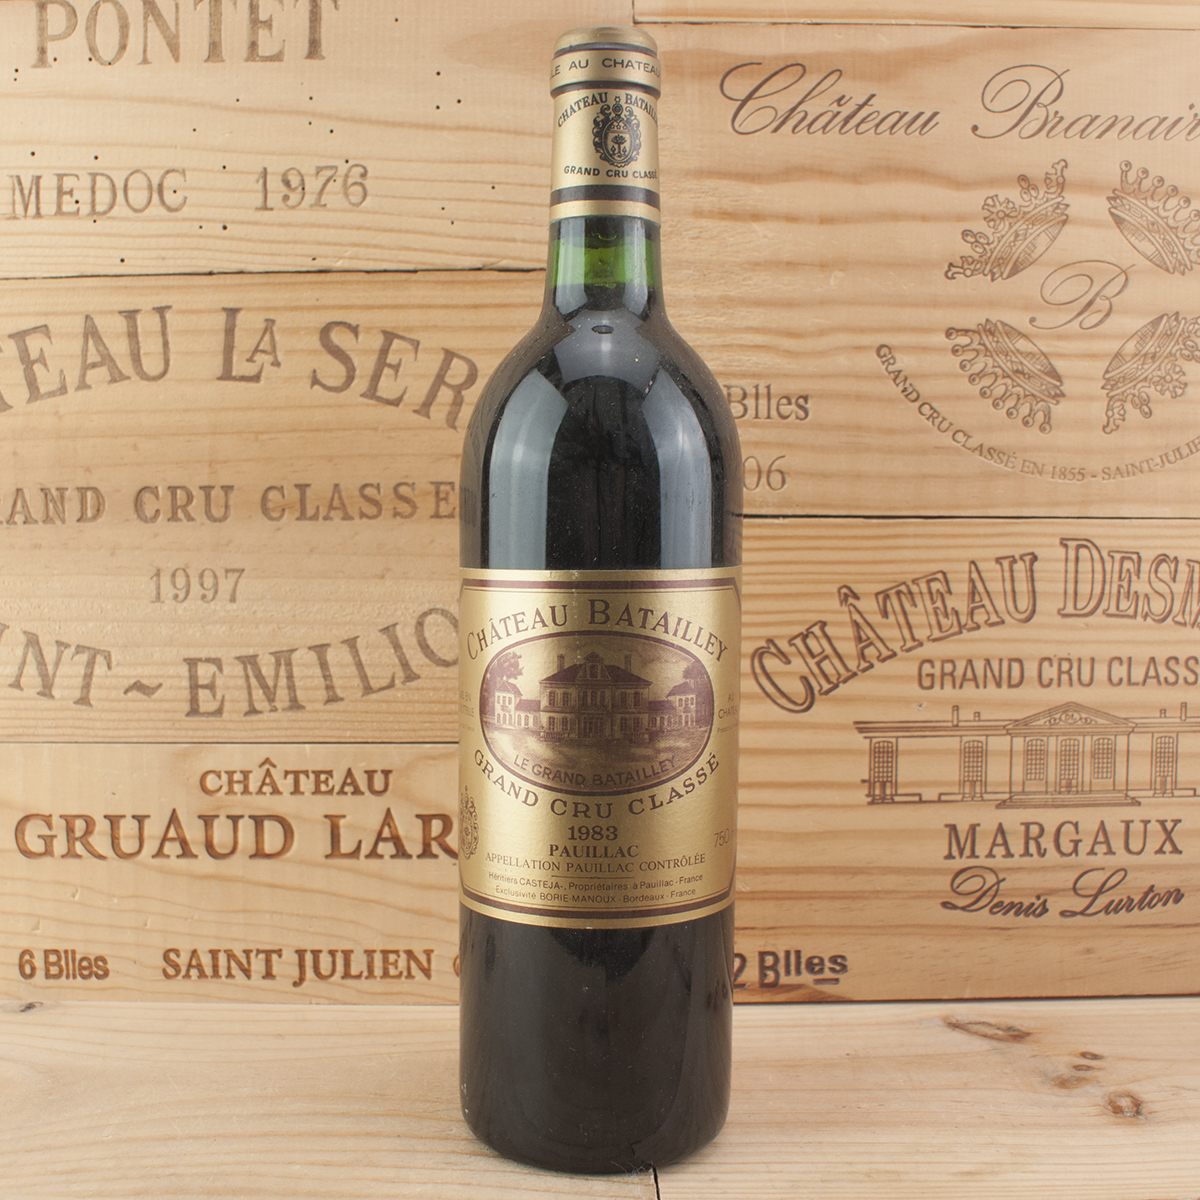 1983 Chateau Batailley